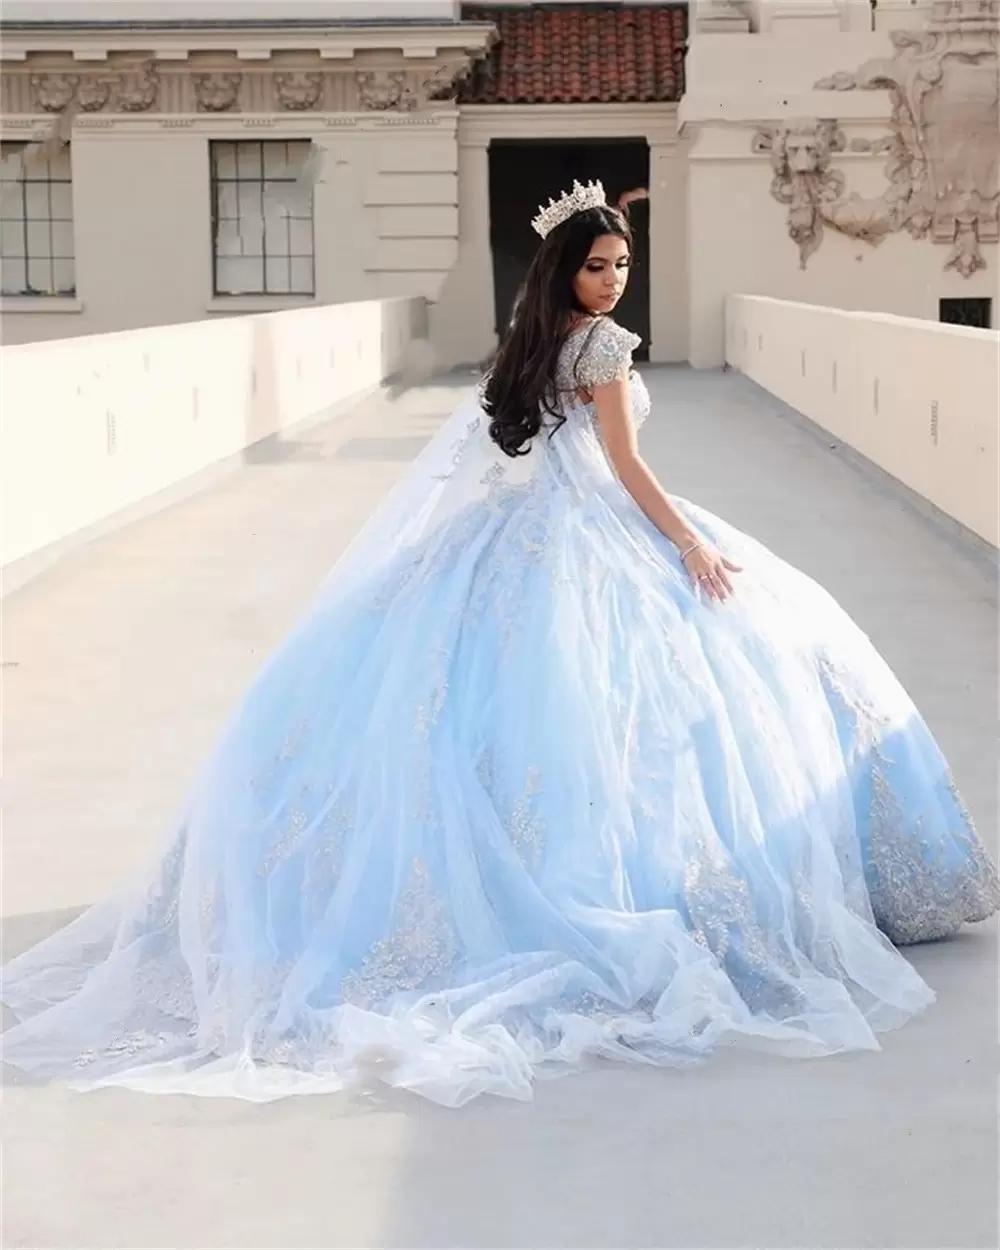 2022 Quinceanera Dresses Sparkly Sequined Lace Ball Gown Sweetheart With Cape Crystal Beads Light Blue Corset Back Tulle Sweet 16 Party Prom Evening Gowns